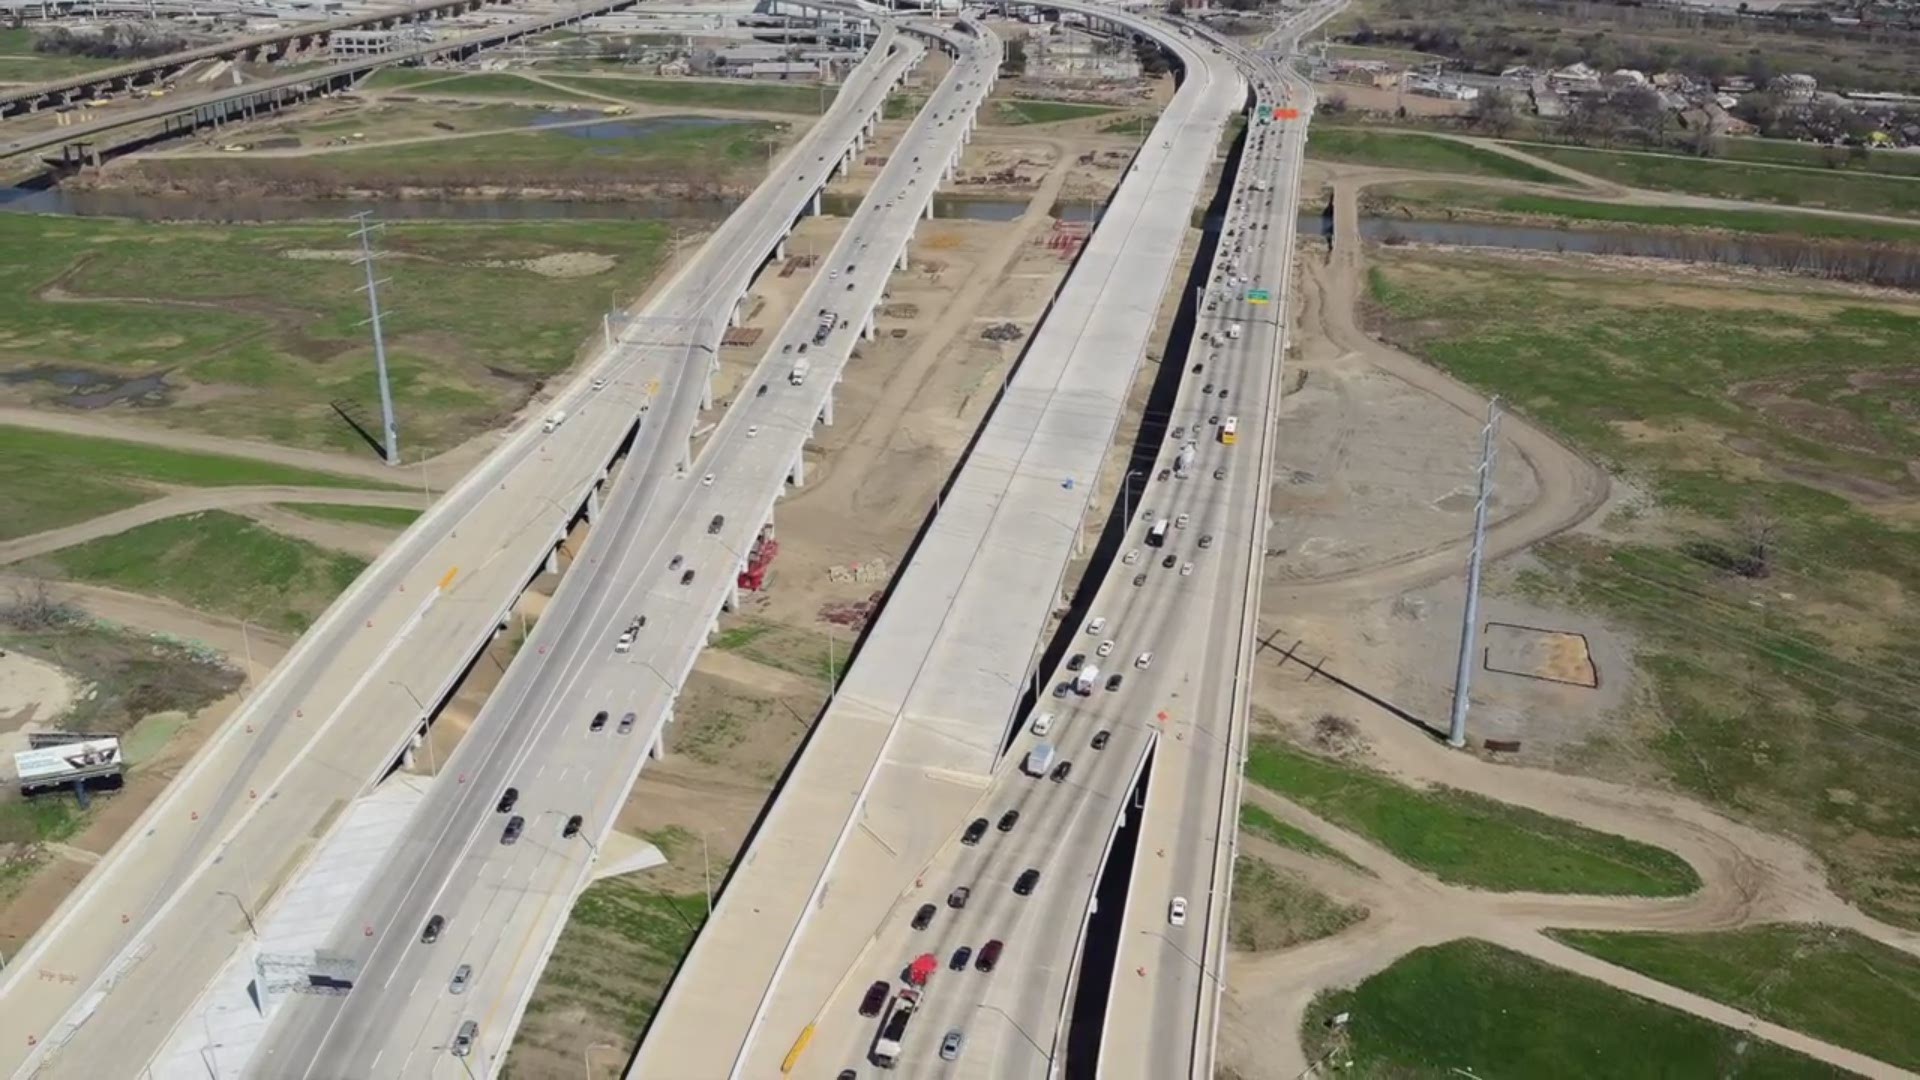 The Dallas Horseshoe Project announced a new lane opening happening March 25. Video: Dallas Horseshoe